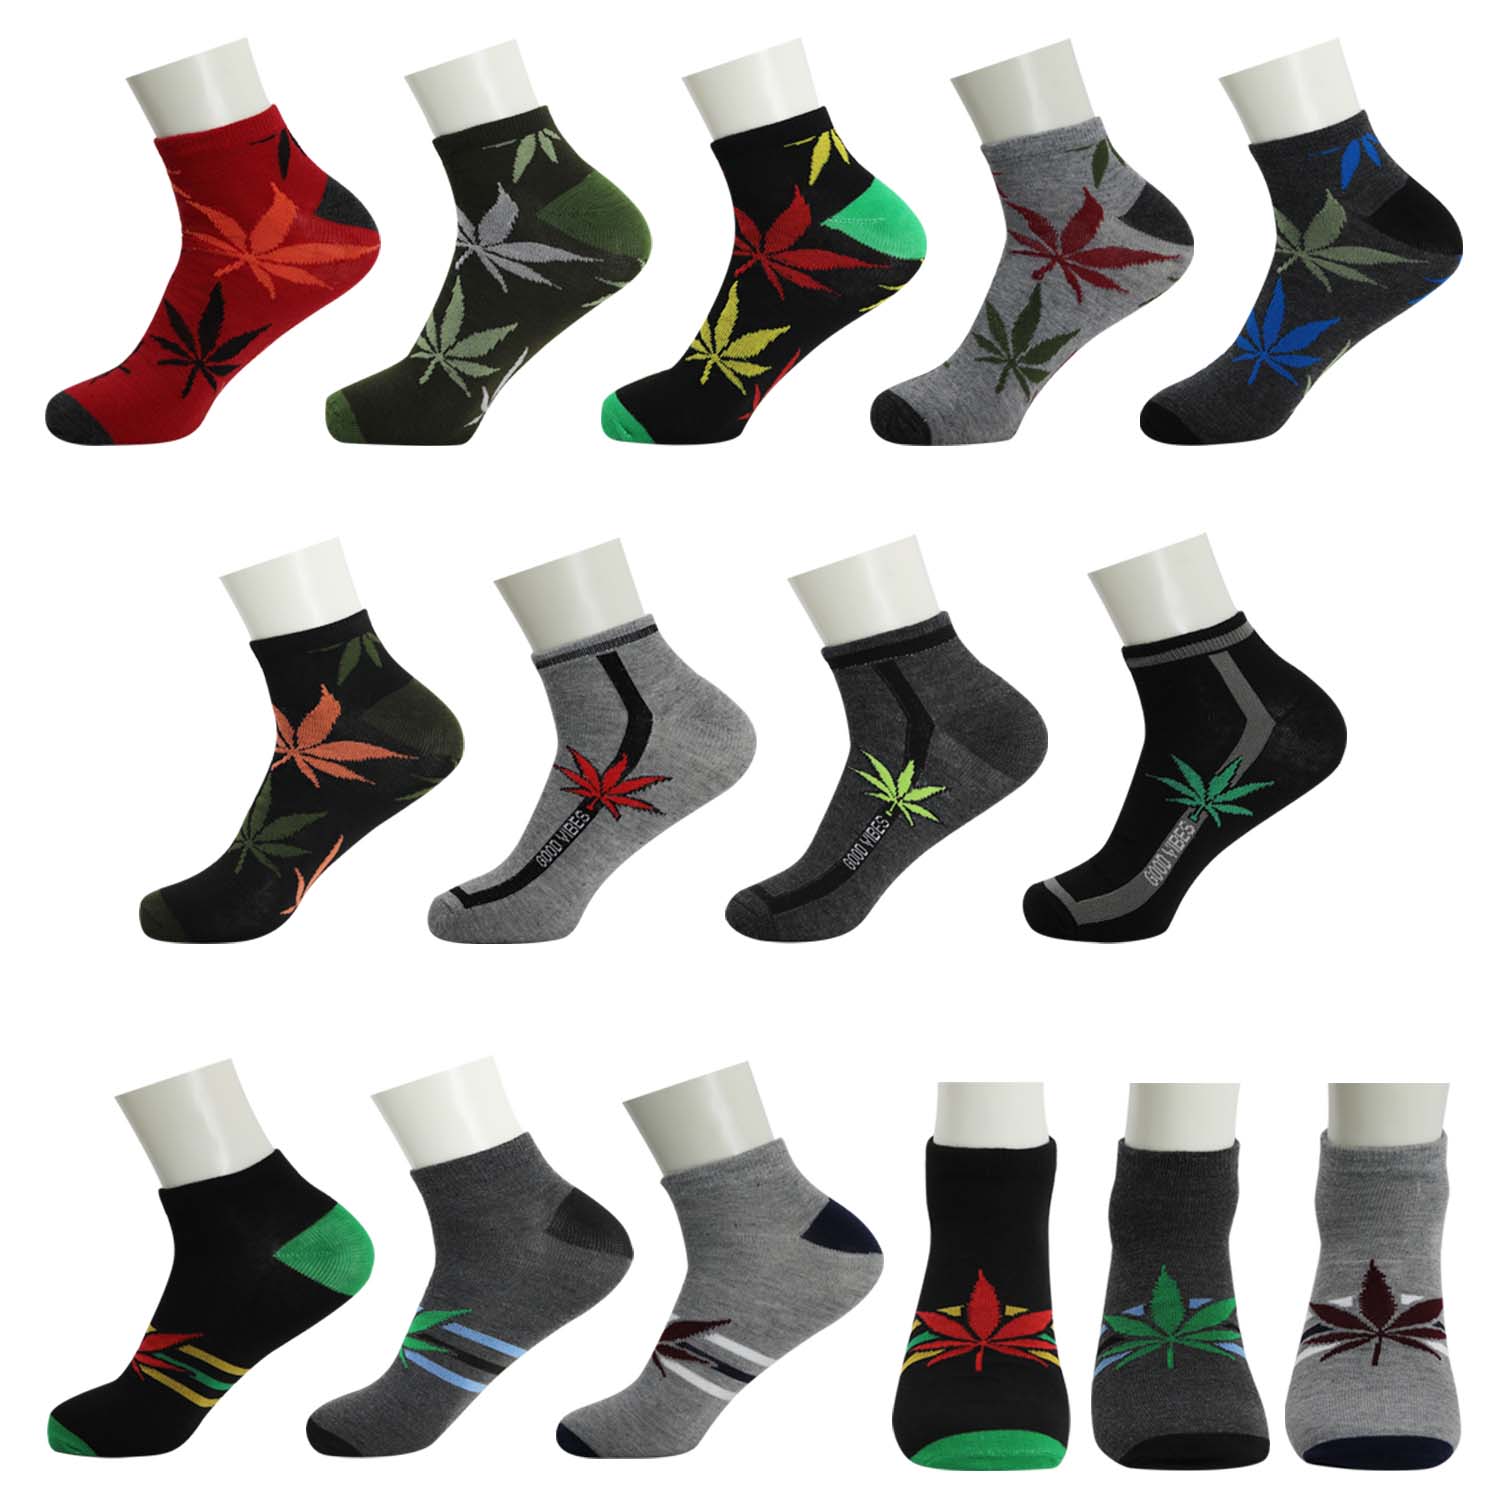 144 Pairs - Wholesale Ankle Bulk Socks - Fits Sizes 10-13- Assorted Colors/Patterns